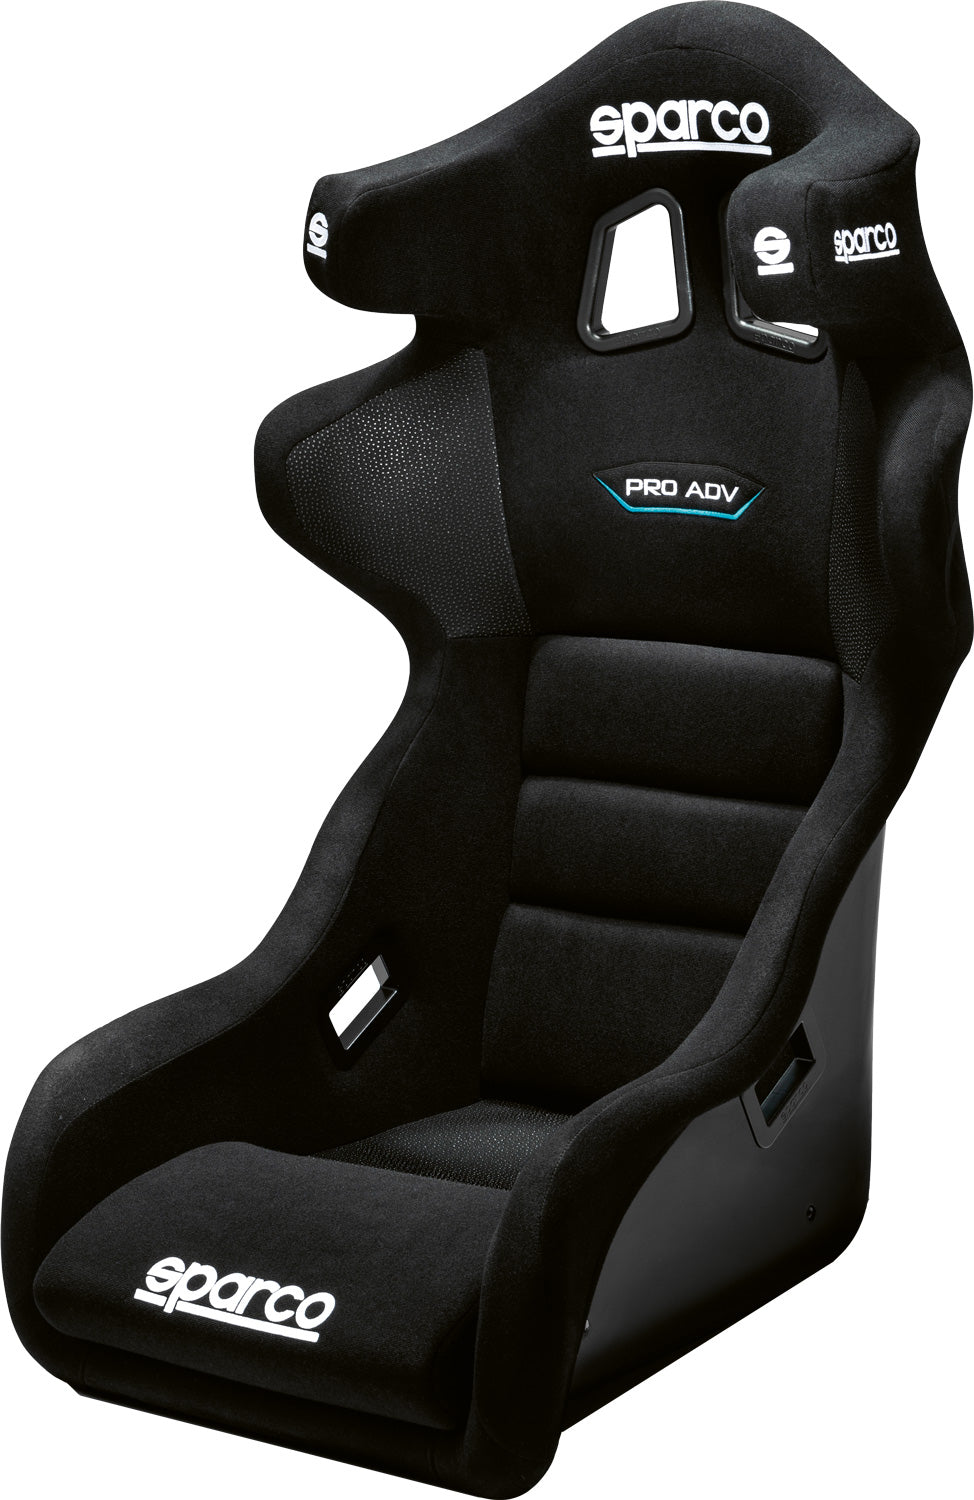 Sparco racing seat Pro ADV QRT